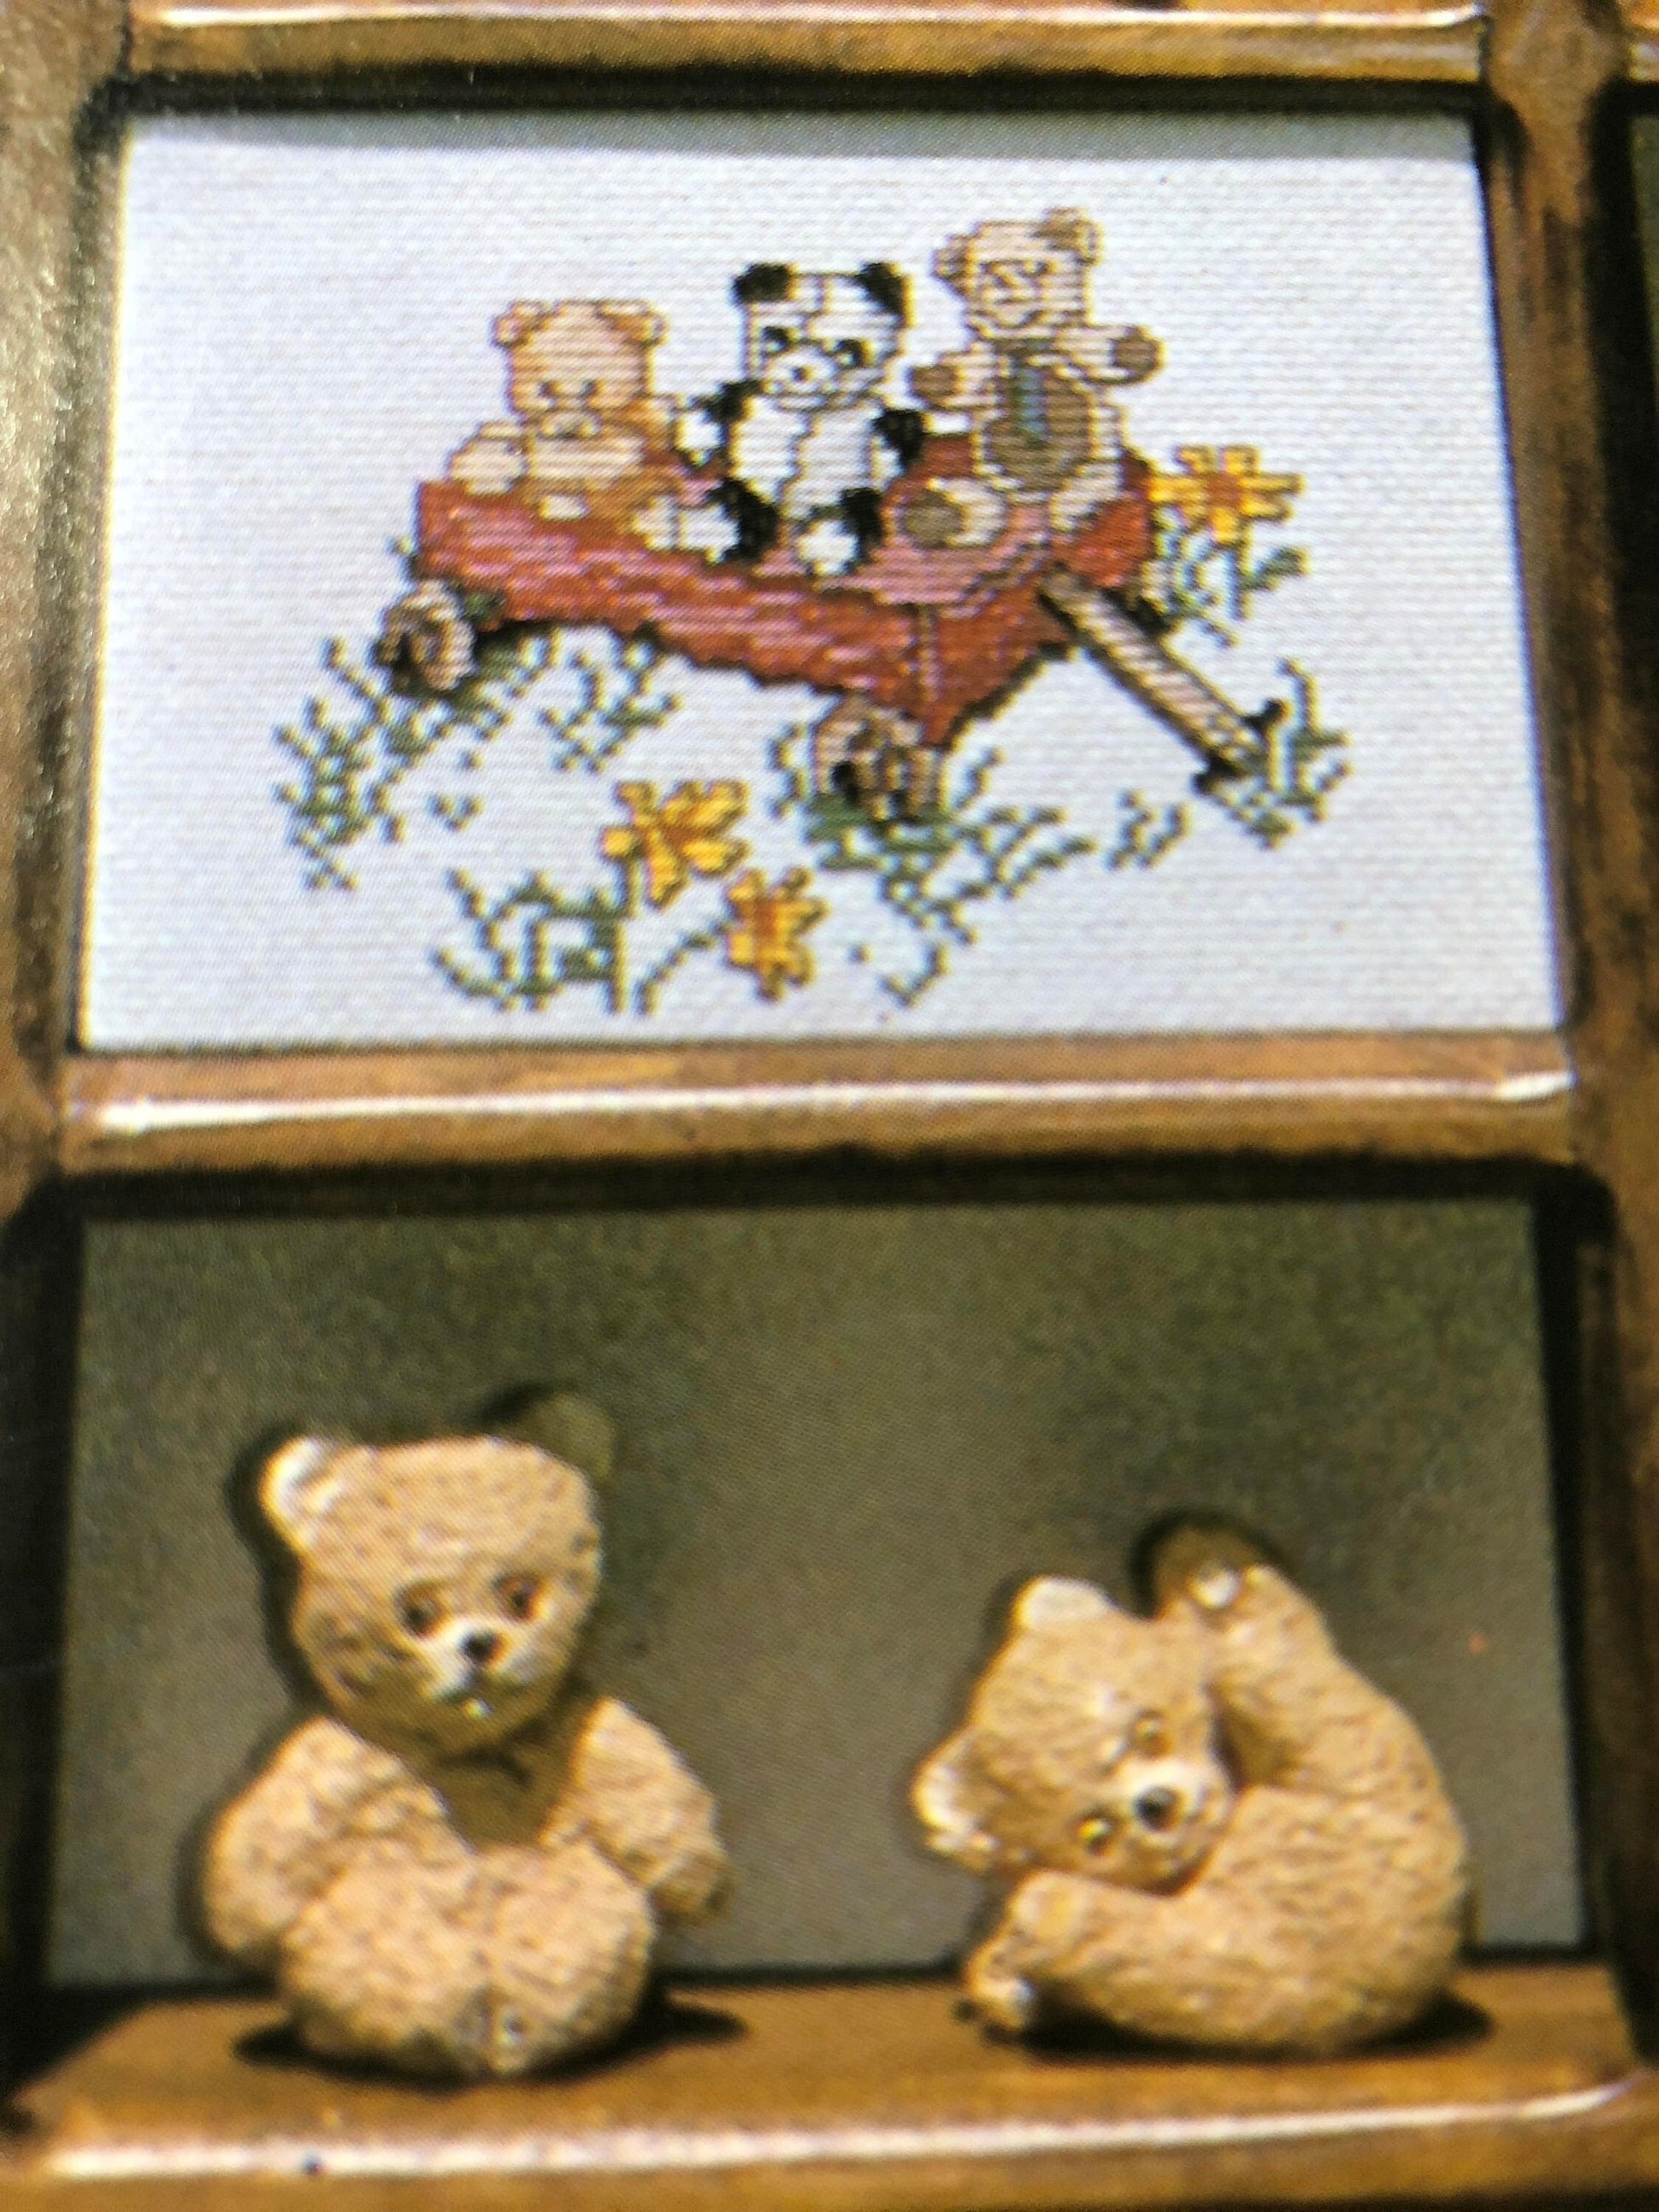 A &quot;Bear&quot; Collection, 1984, and, Storybook Bears, 1985, Set of 2, Vintage, Bear Theme, Counted Cross Stitch, Pattern Books